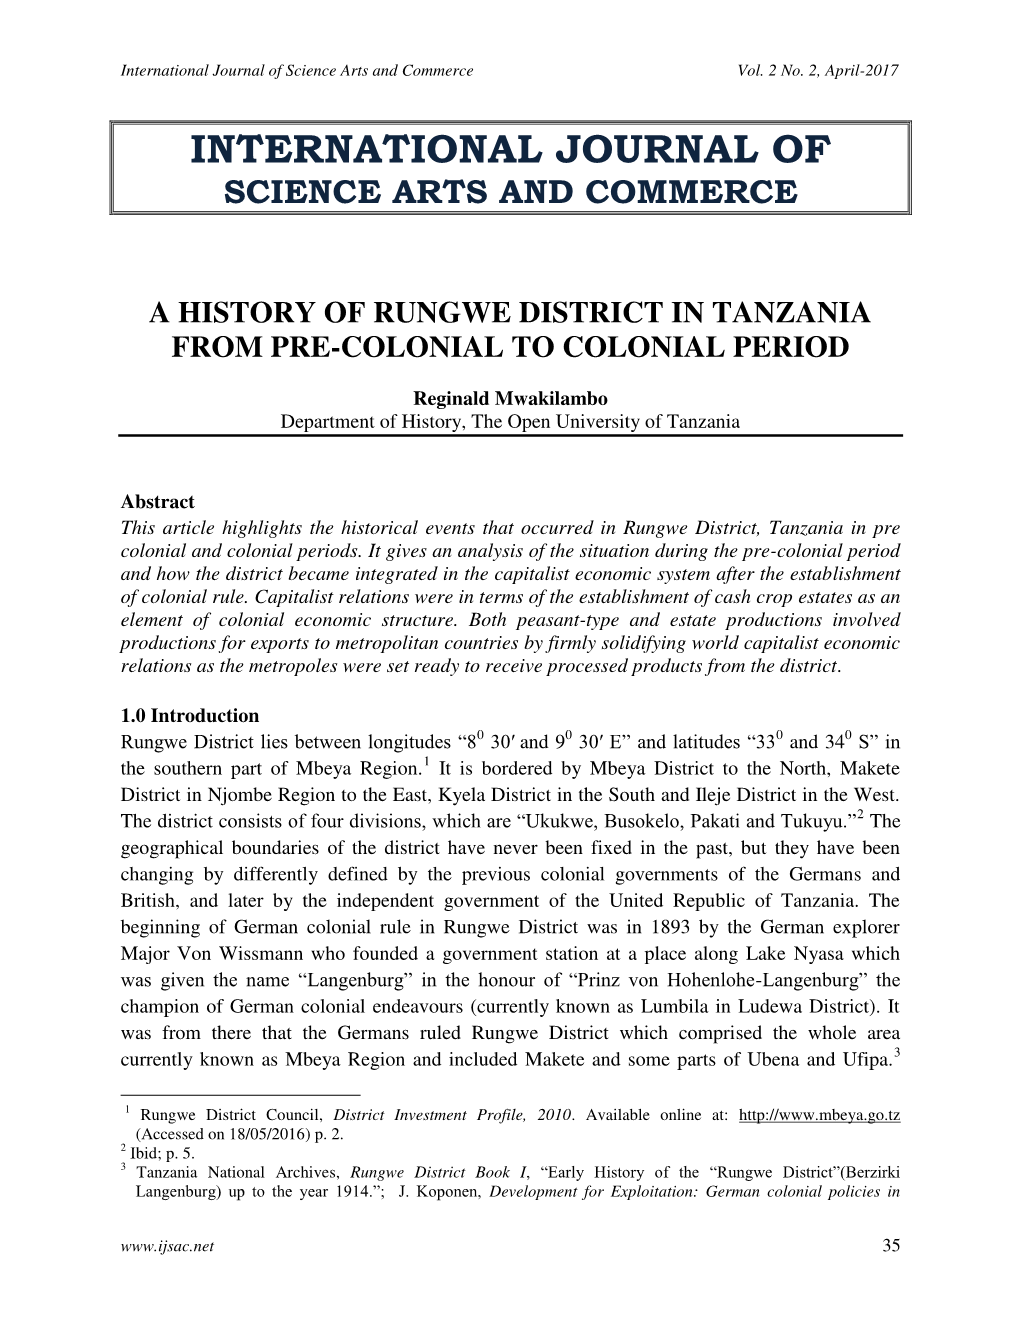 International Journal of Science Arts and Commerce a History of Rungwe